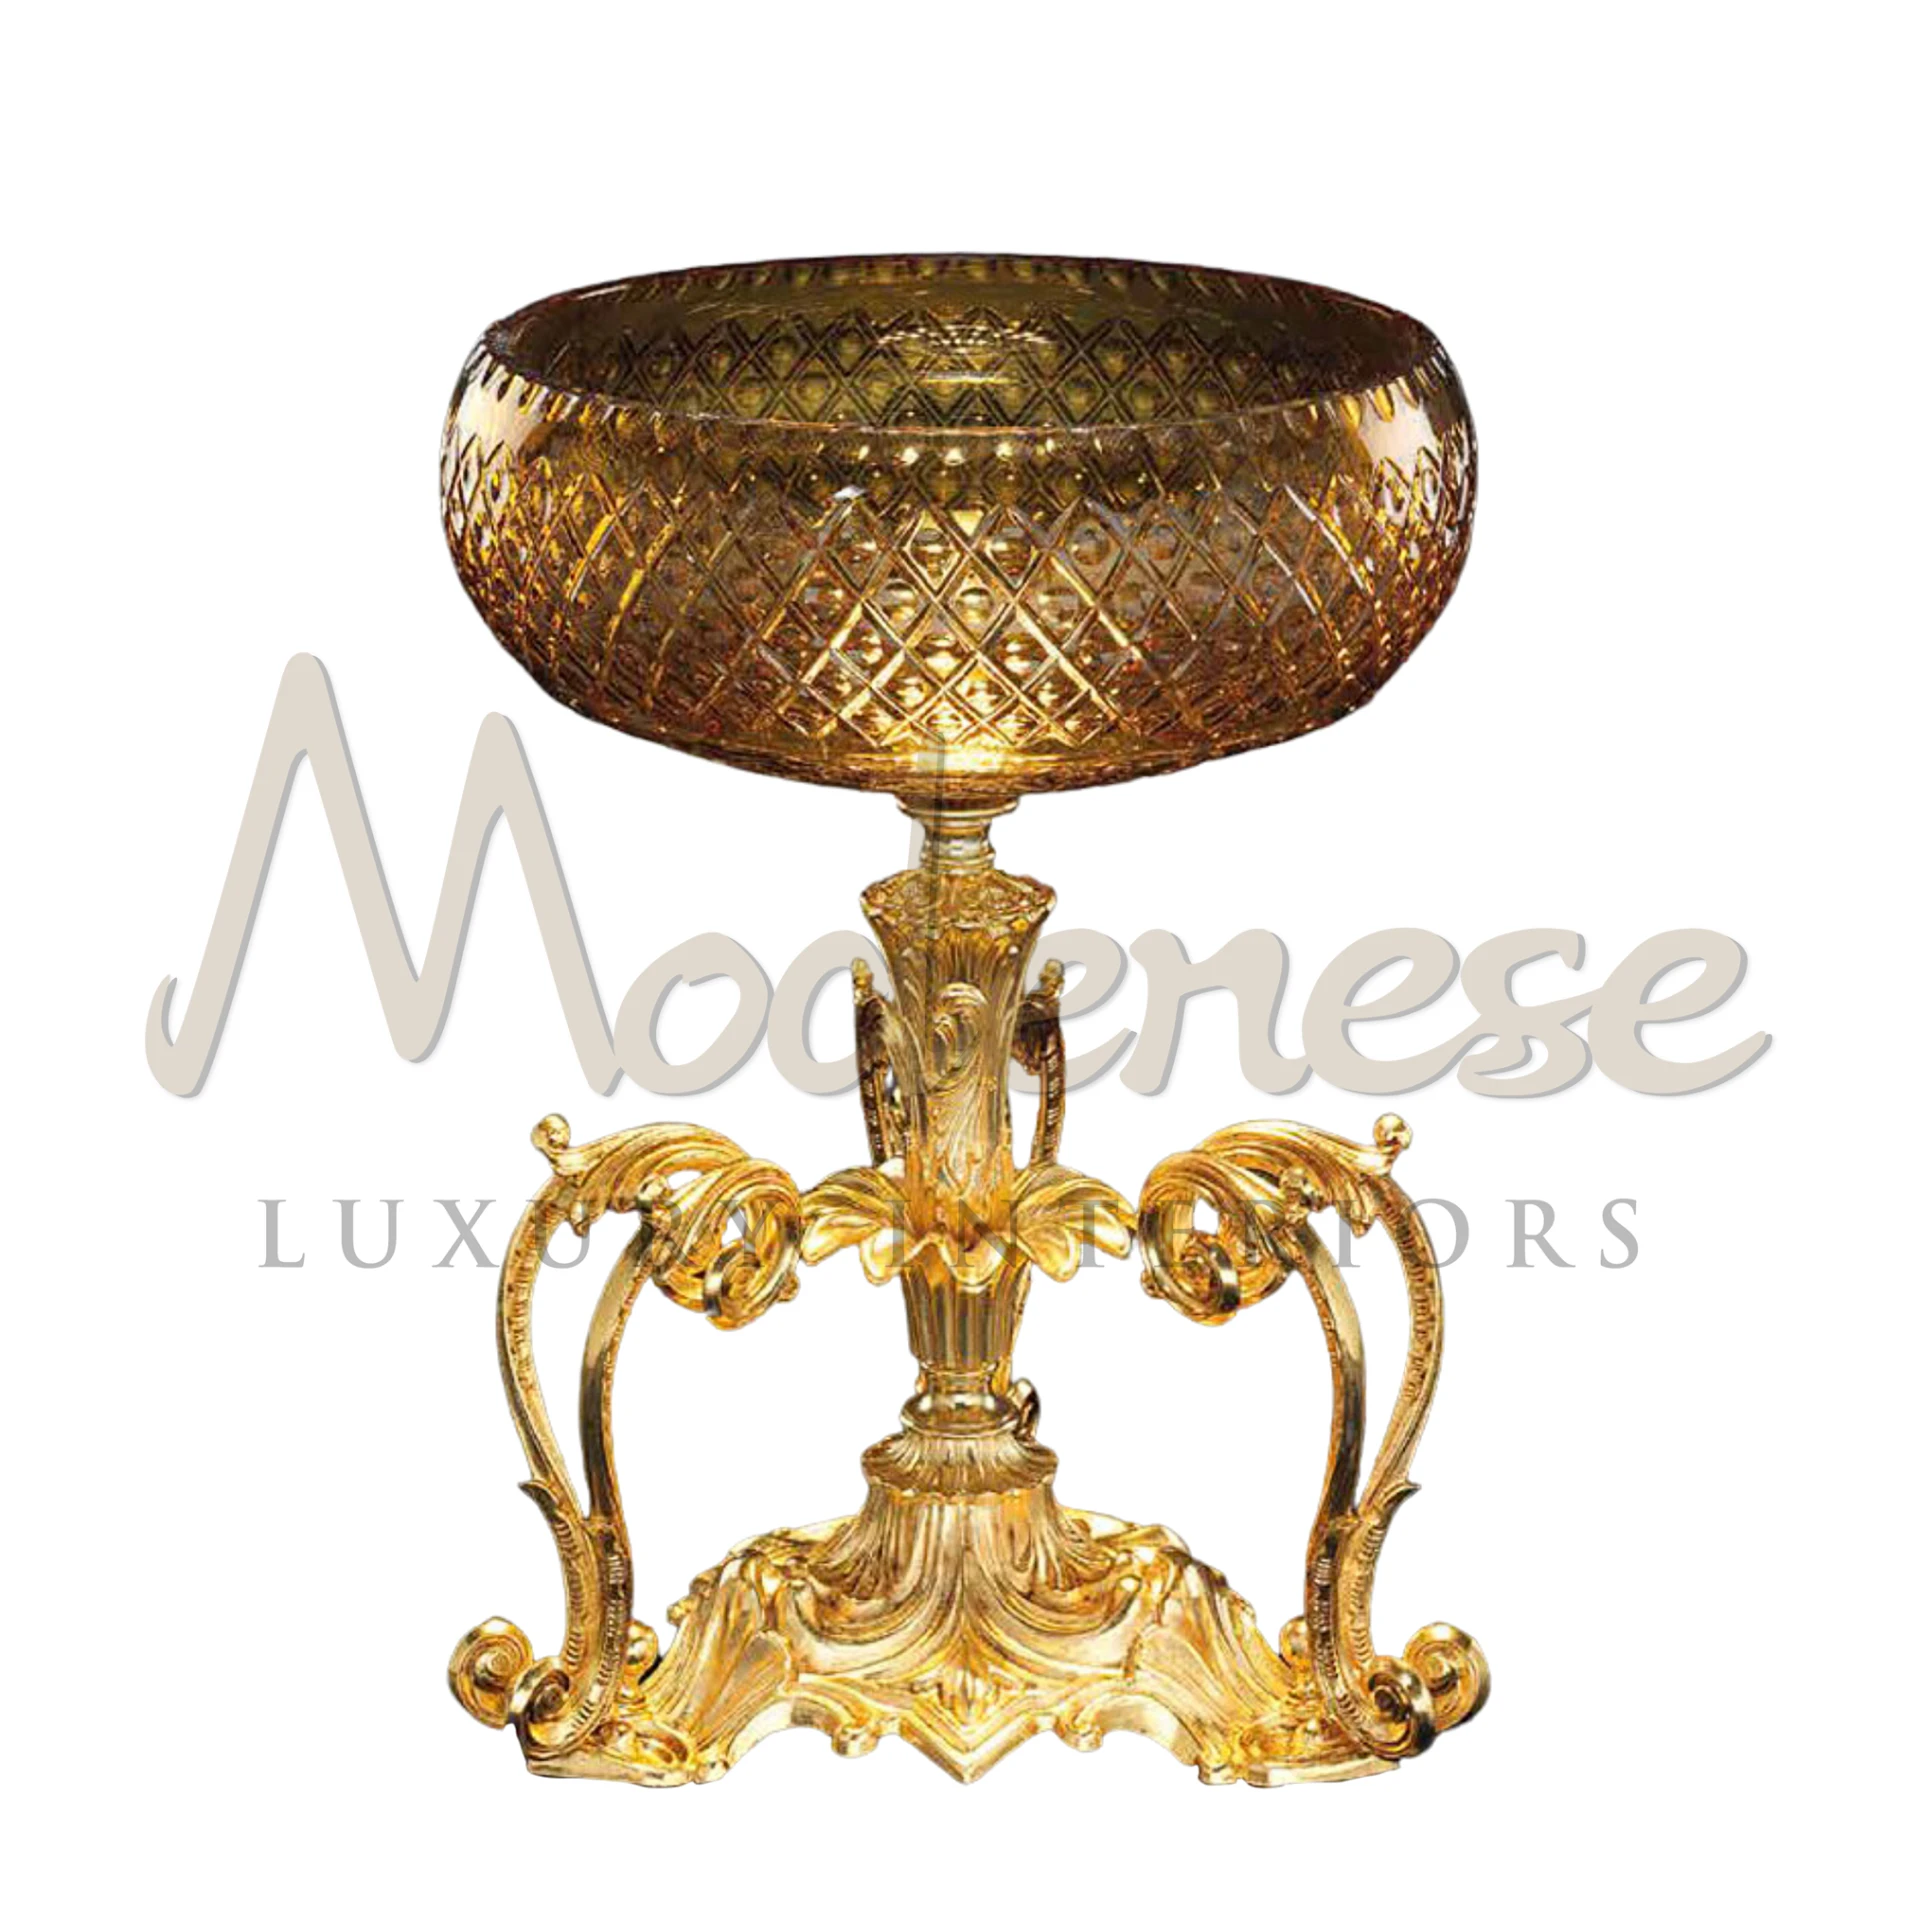 Gorgeous shaped vase with gold handles, blending intricate design and luxurious accents for an elegant interior statement.